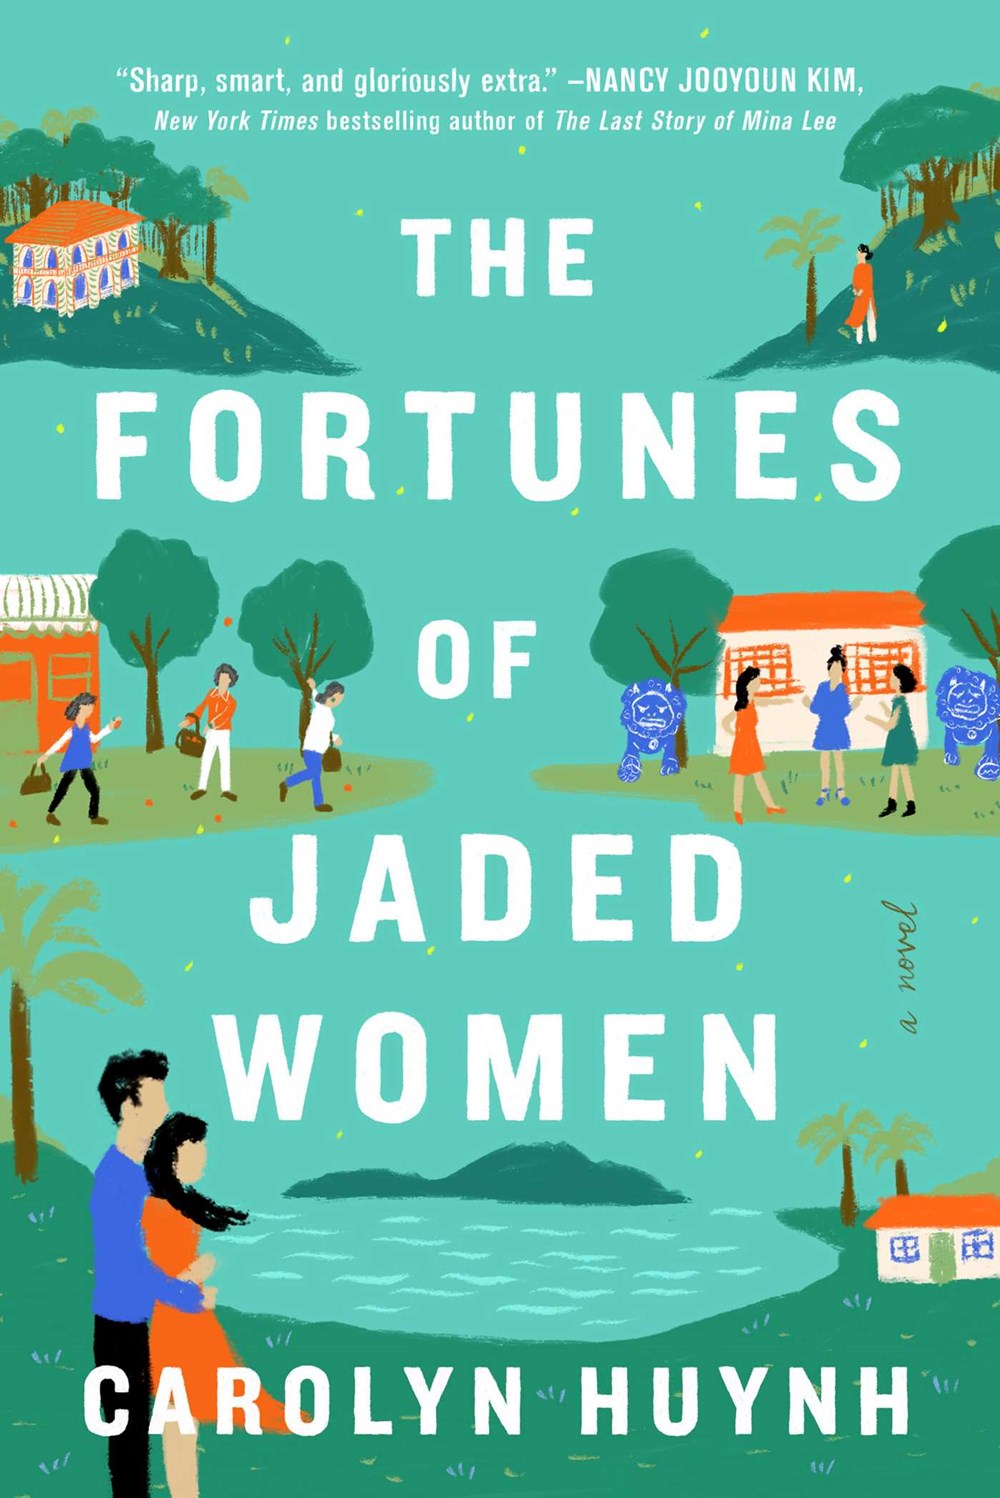 Image of "The Fortunes of Jaded Women"